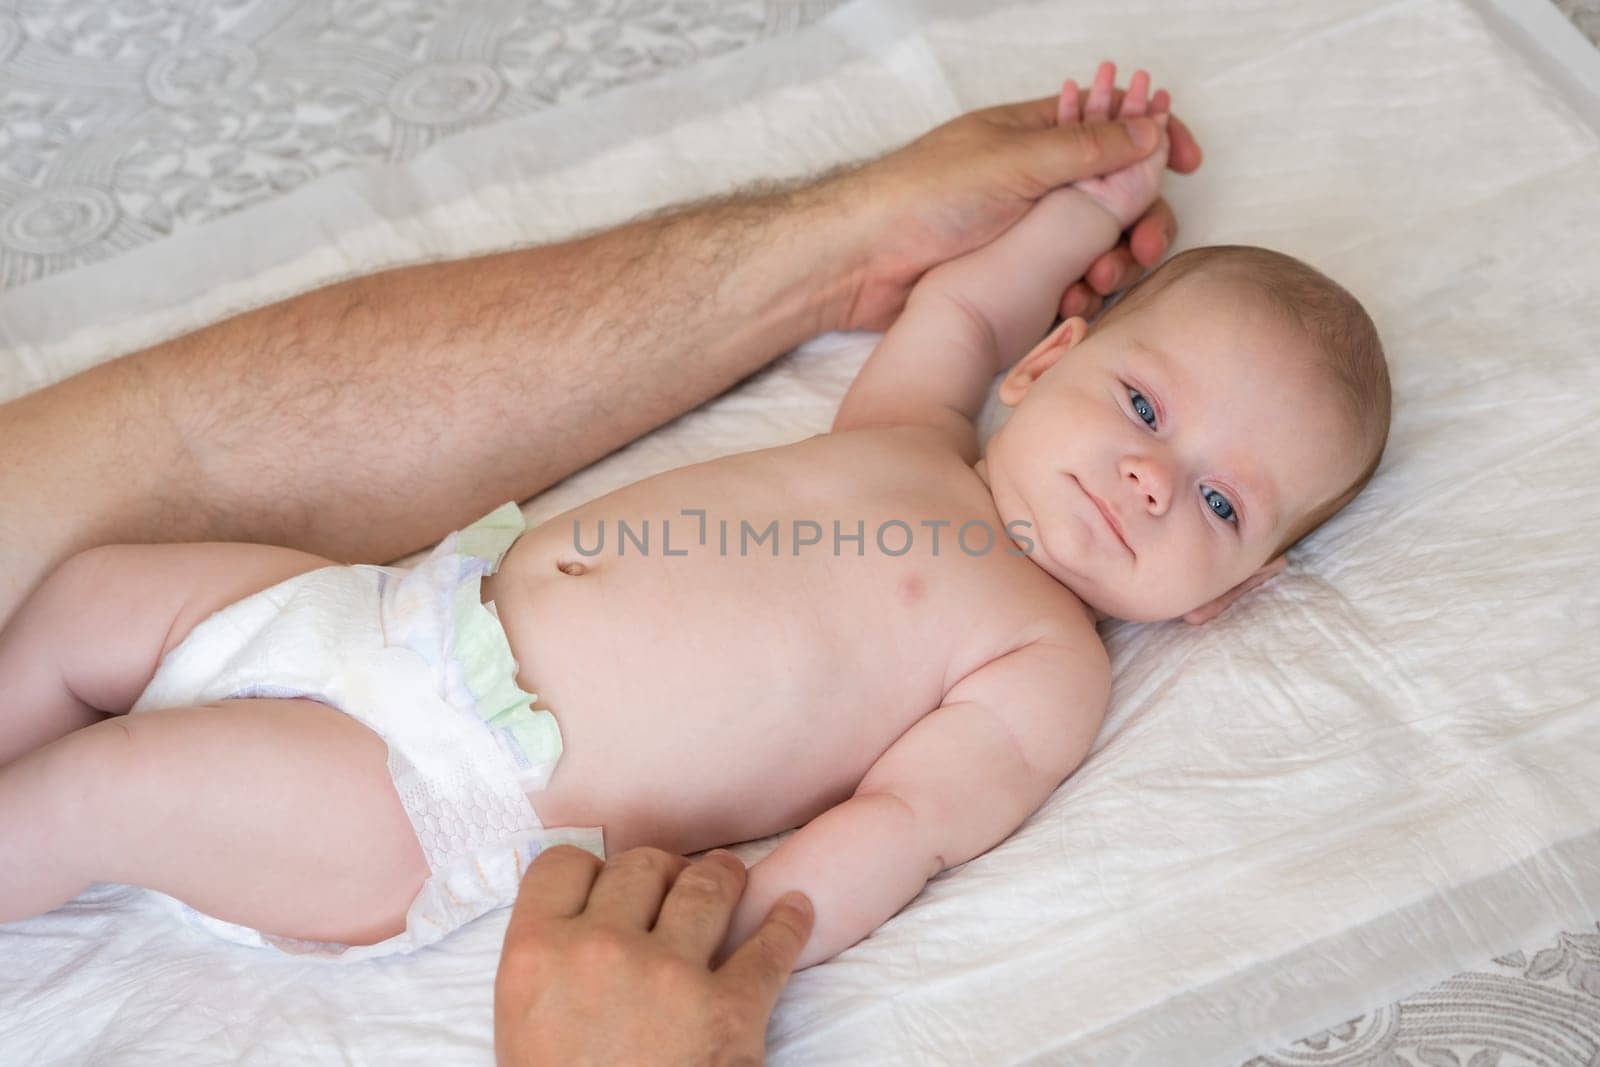 As a loving father, he uses massage techniques to bond and comfort his newborn child